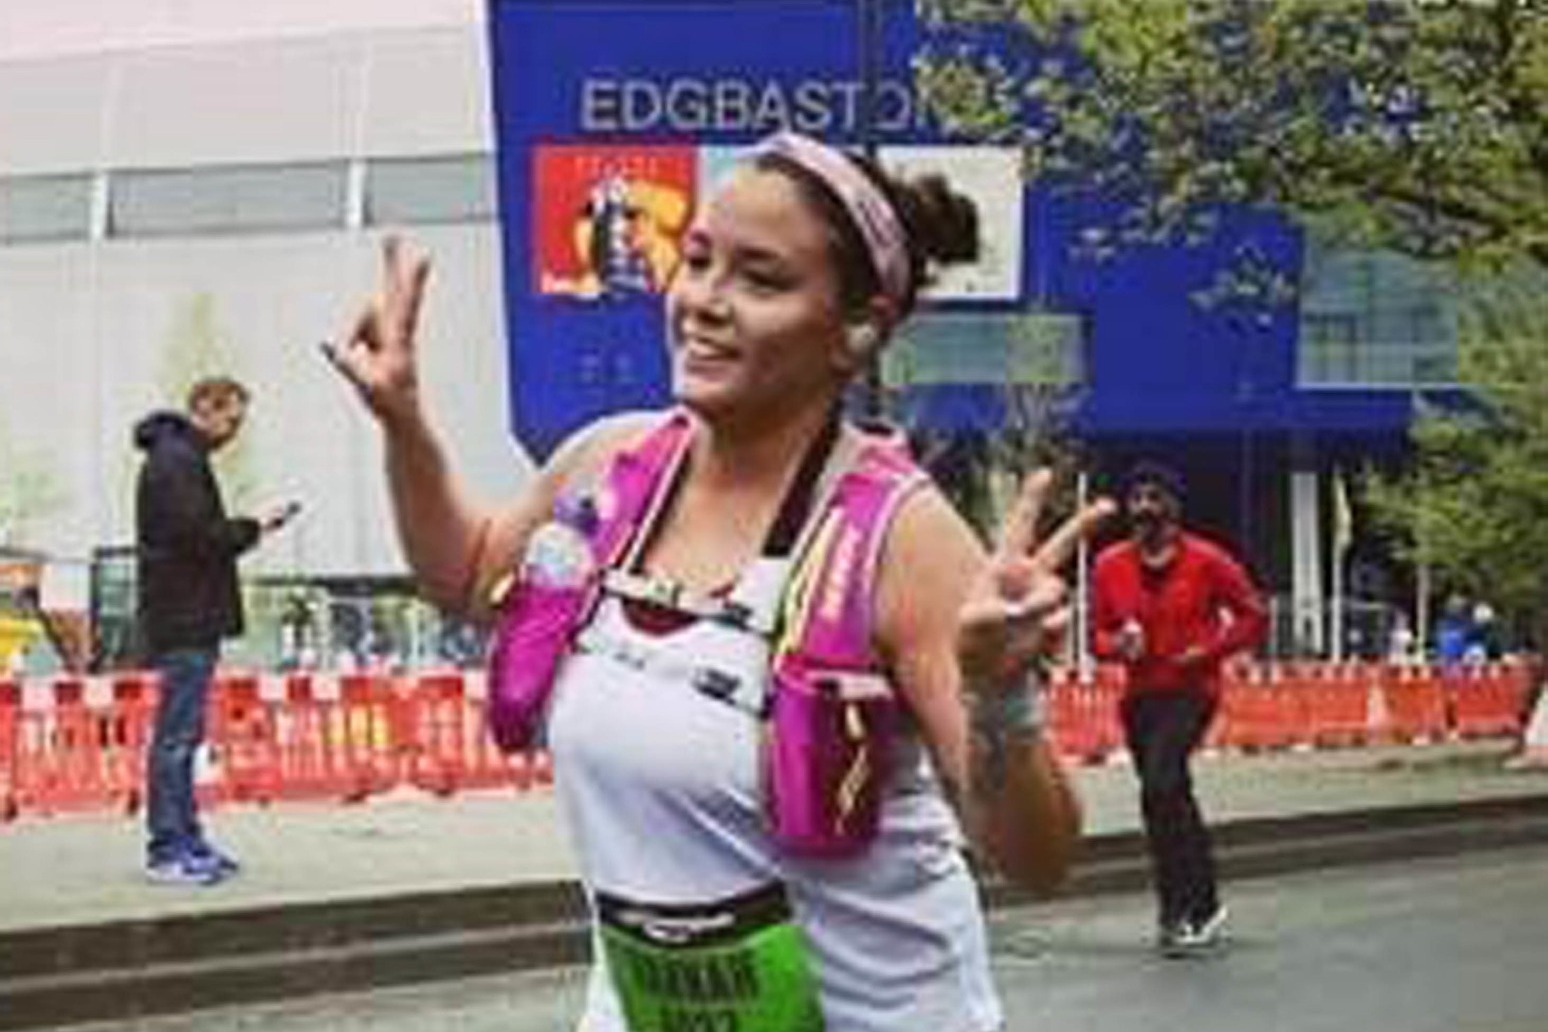 Solicitor to run London Marathon for heart charity after death of sister, 16 